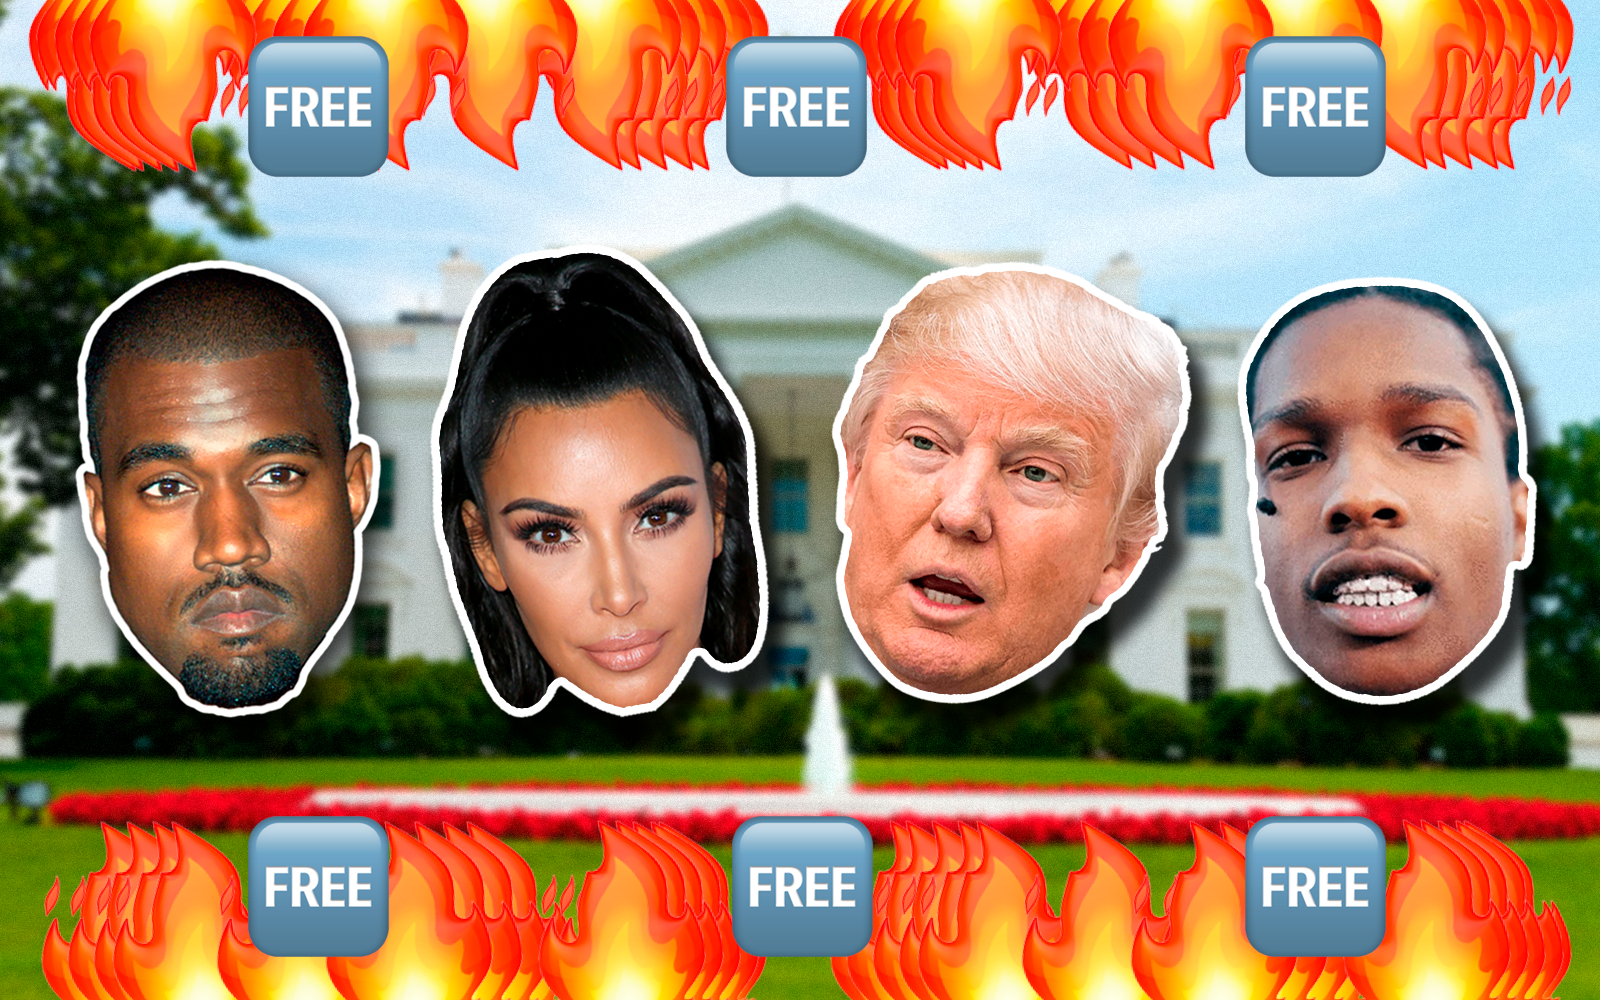 The complete story of ASAP Rocky's arrest Donald Trump, Kim Kardashian and Kanye West: what really happened